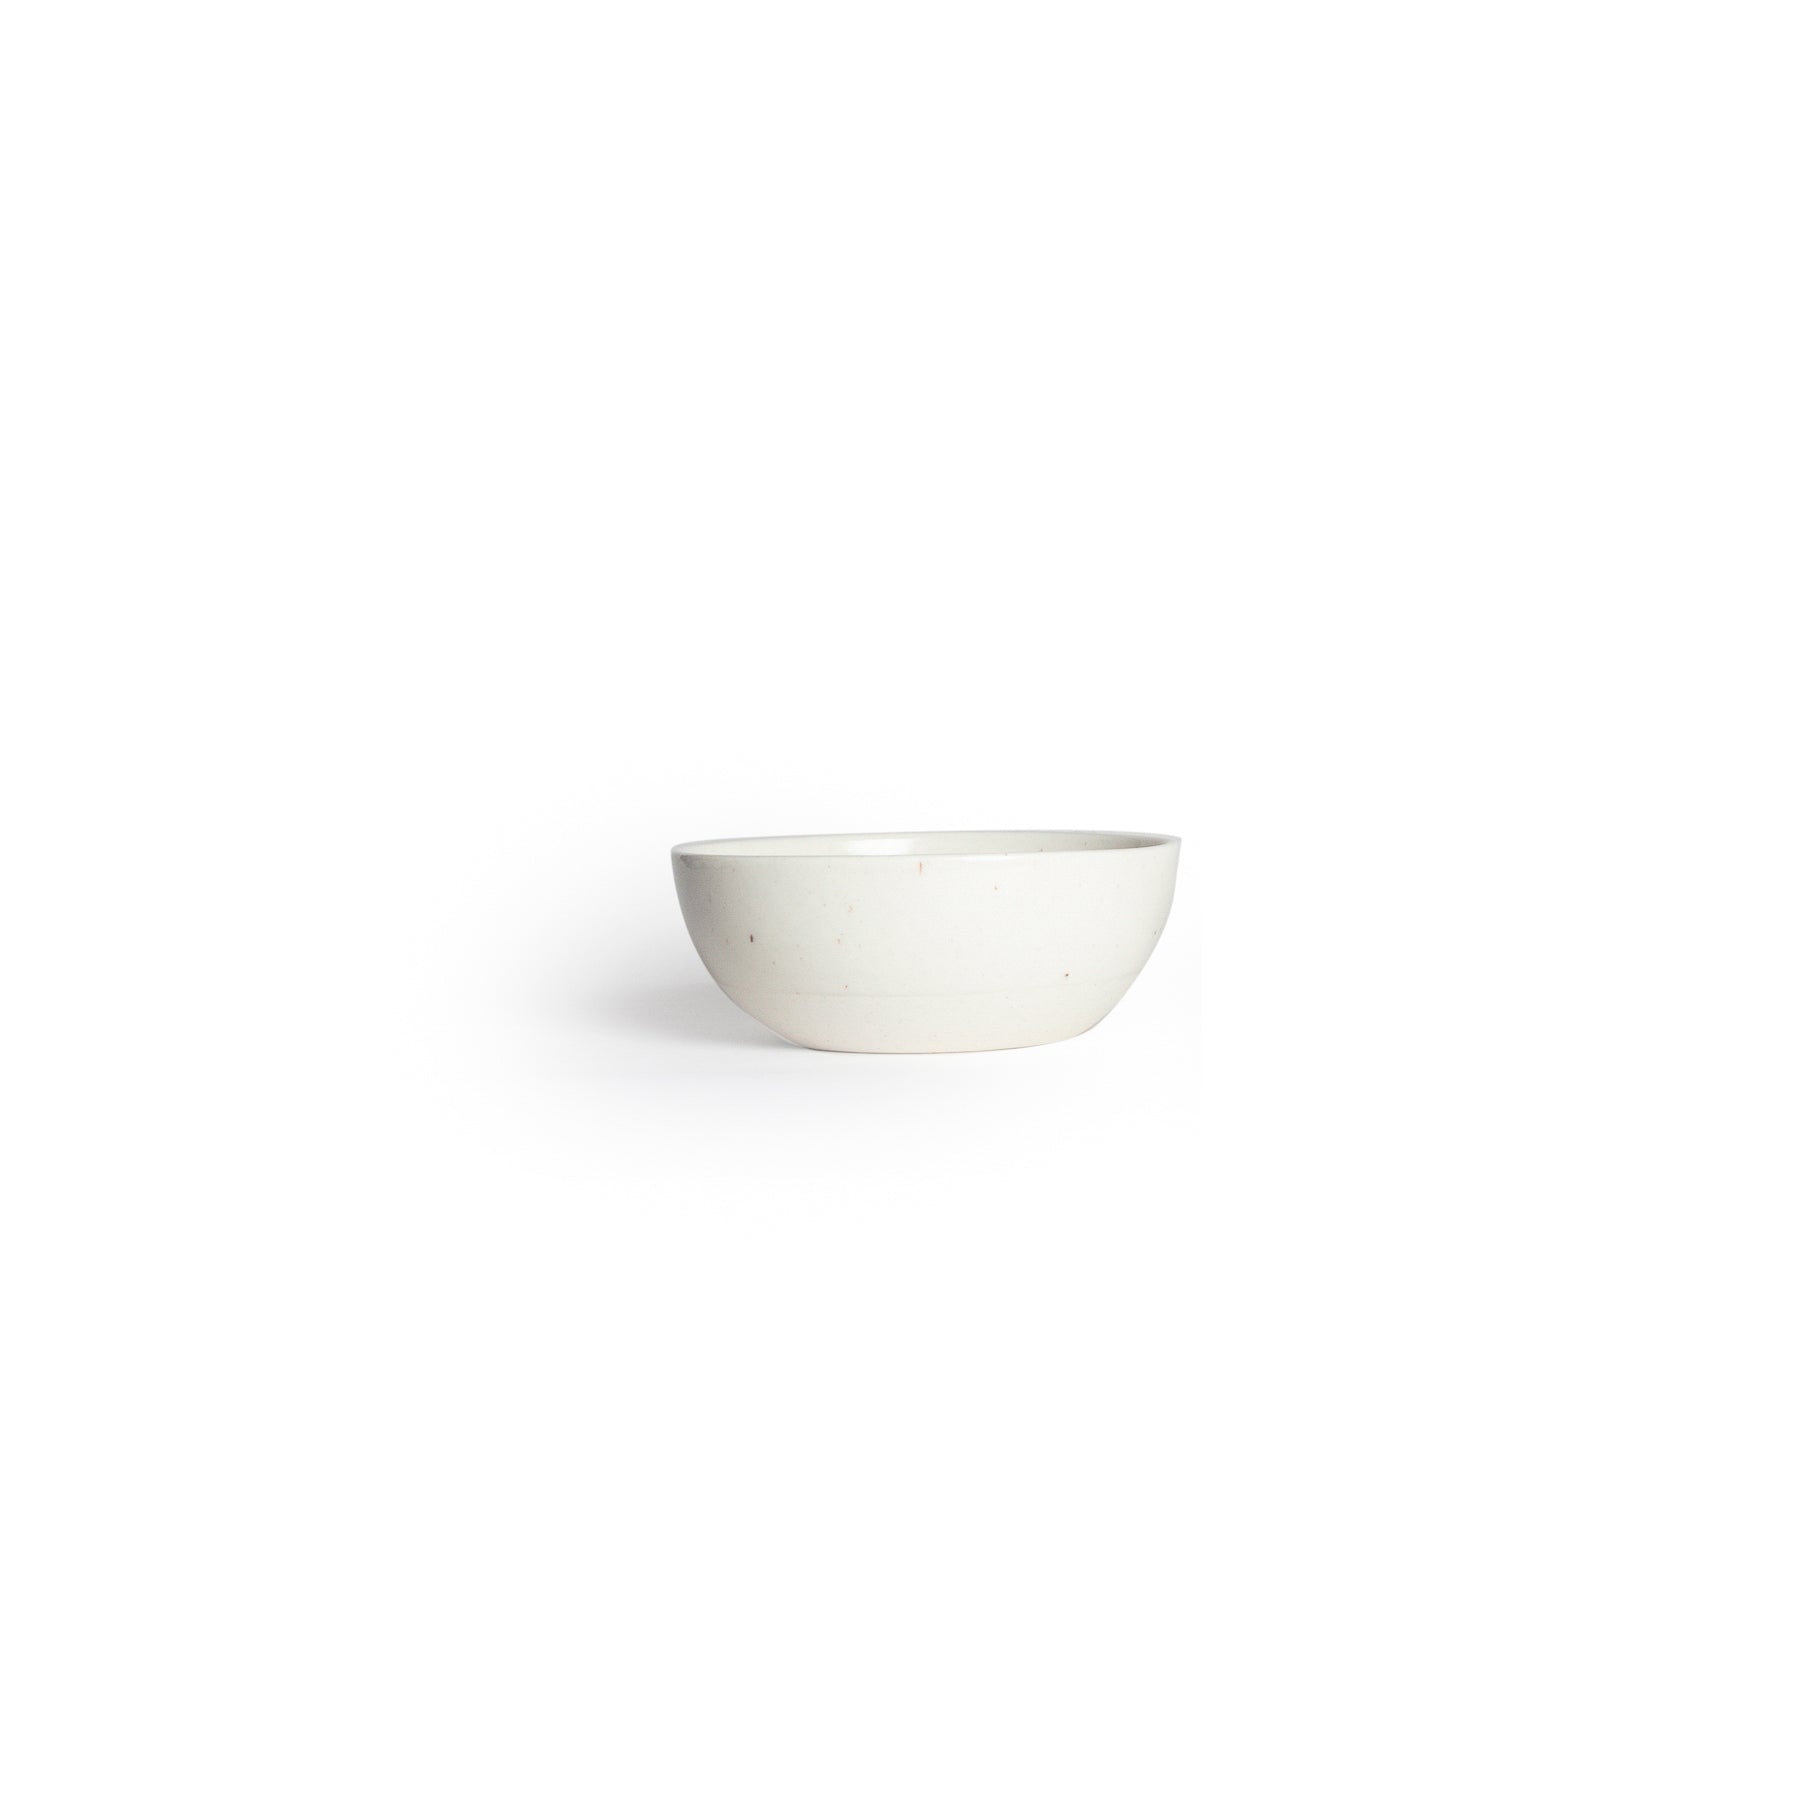 Andrew Molleur Speckle Cereal Bowl